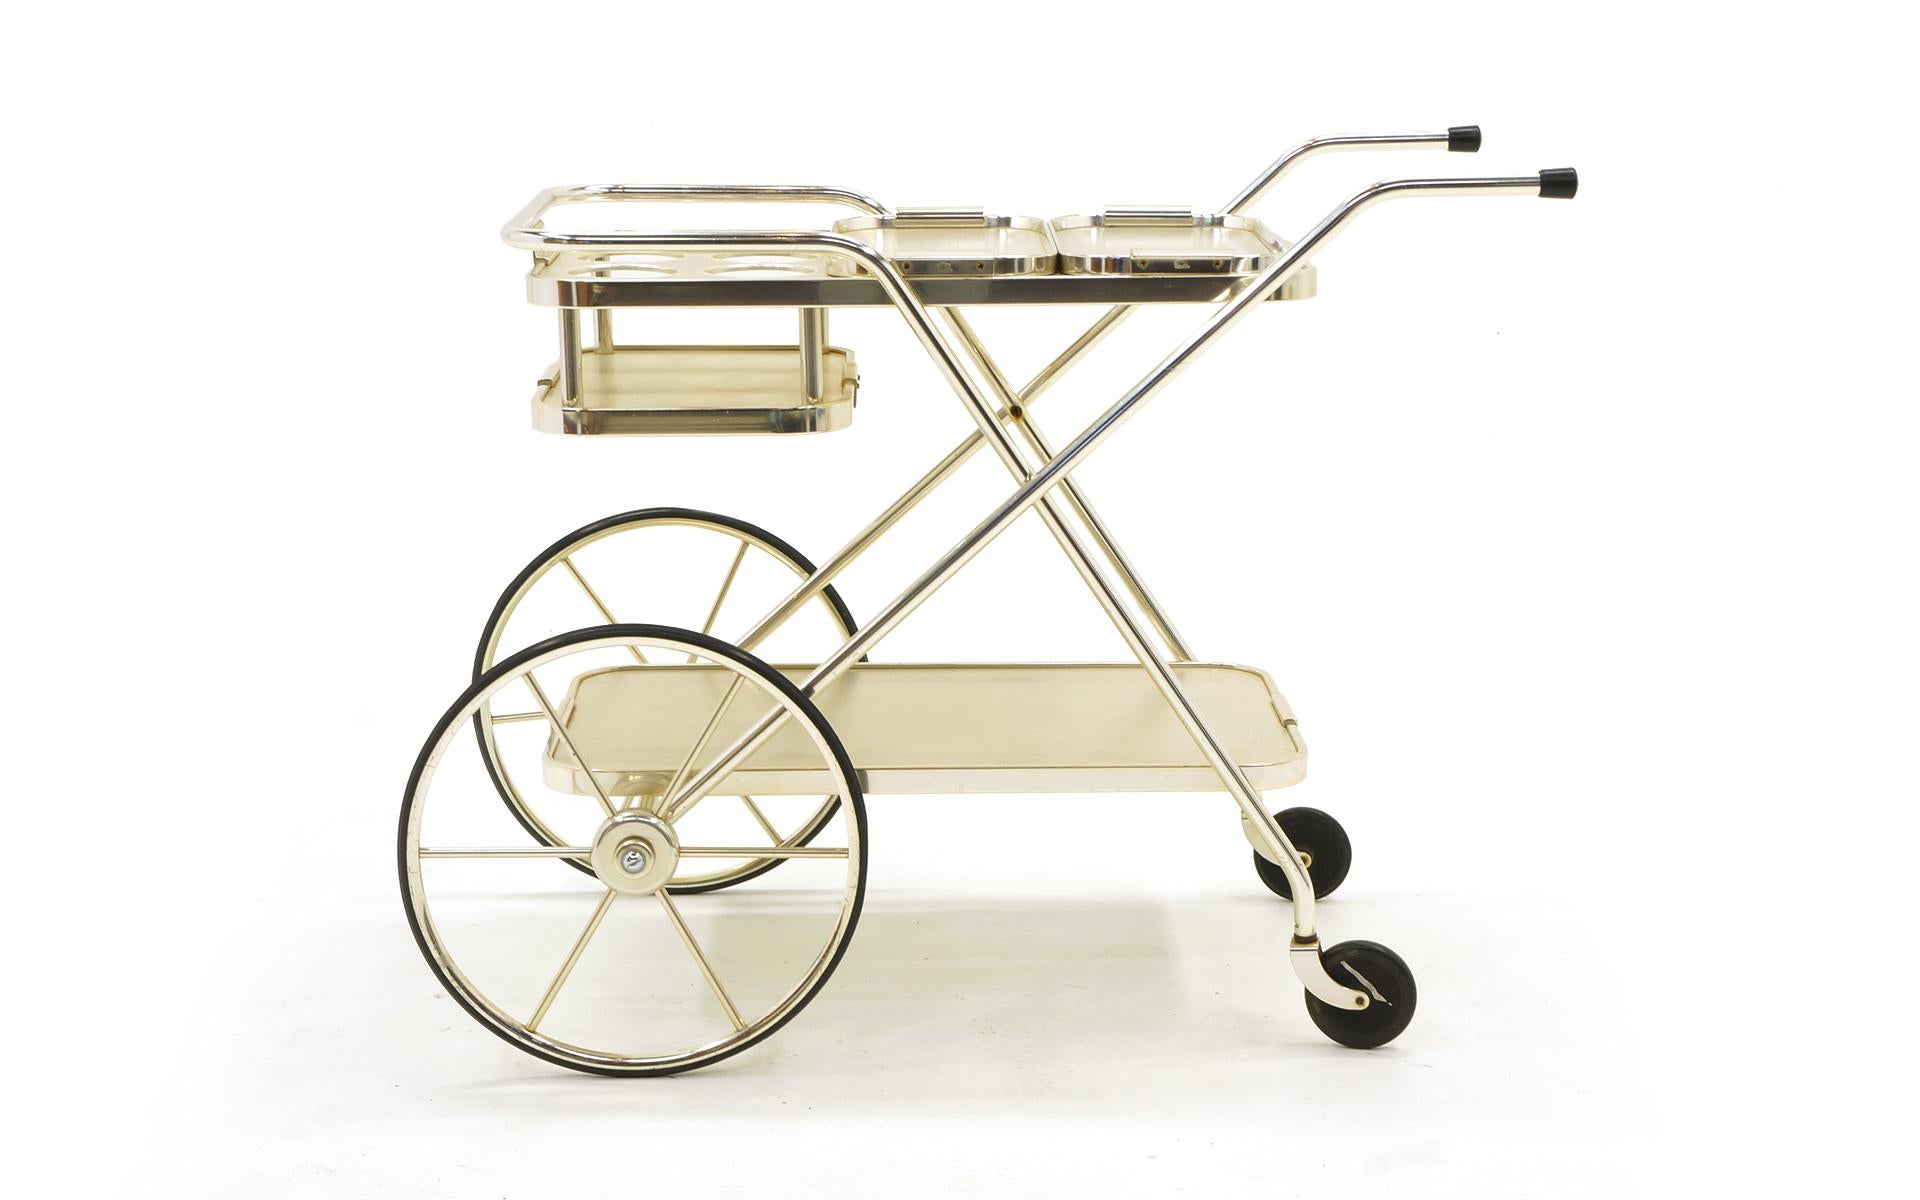 Striking Bar Trolley by Kaymet. All original wheels, casters and includes the original matching pair of serving trays. Beautiful and lightweight anodized aluminum and stainless steel. Upon close inspection there are a few small areas of loss to the